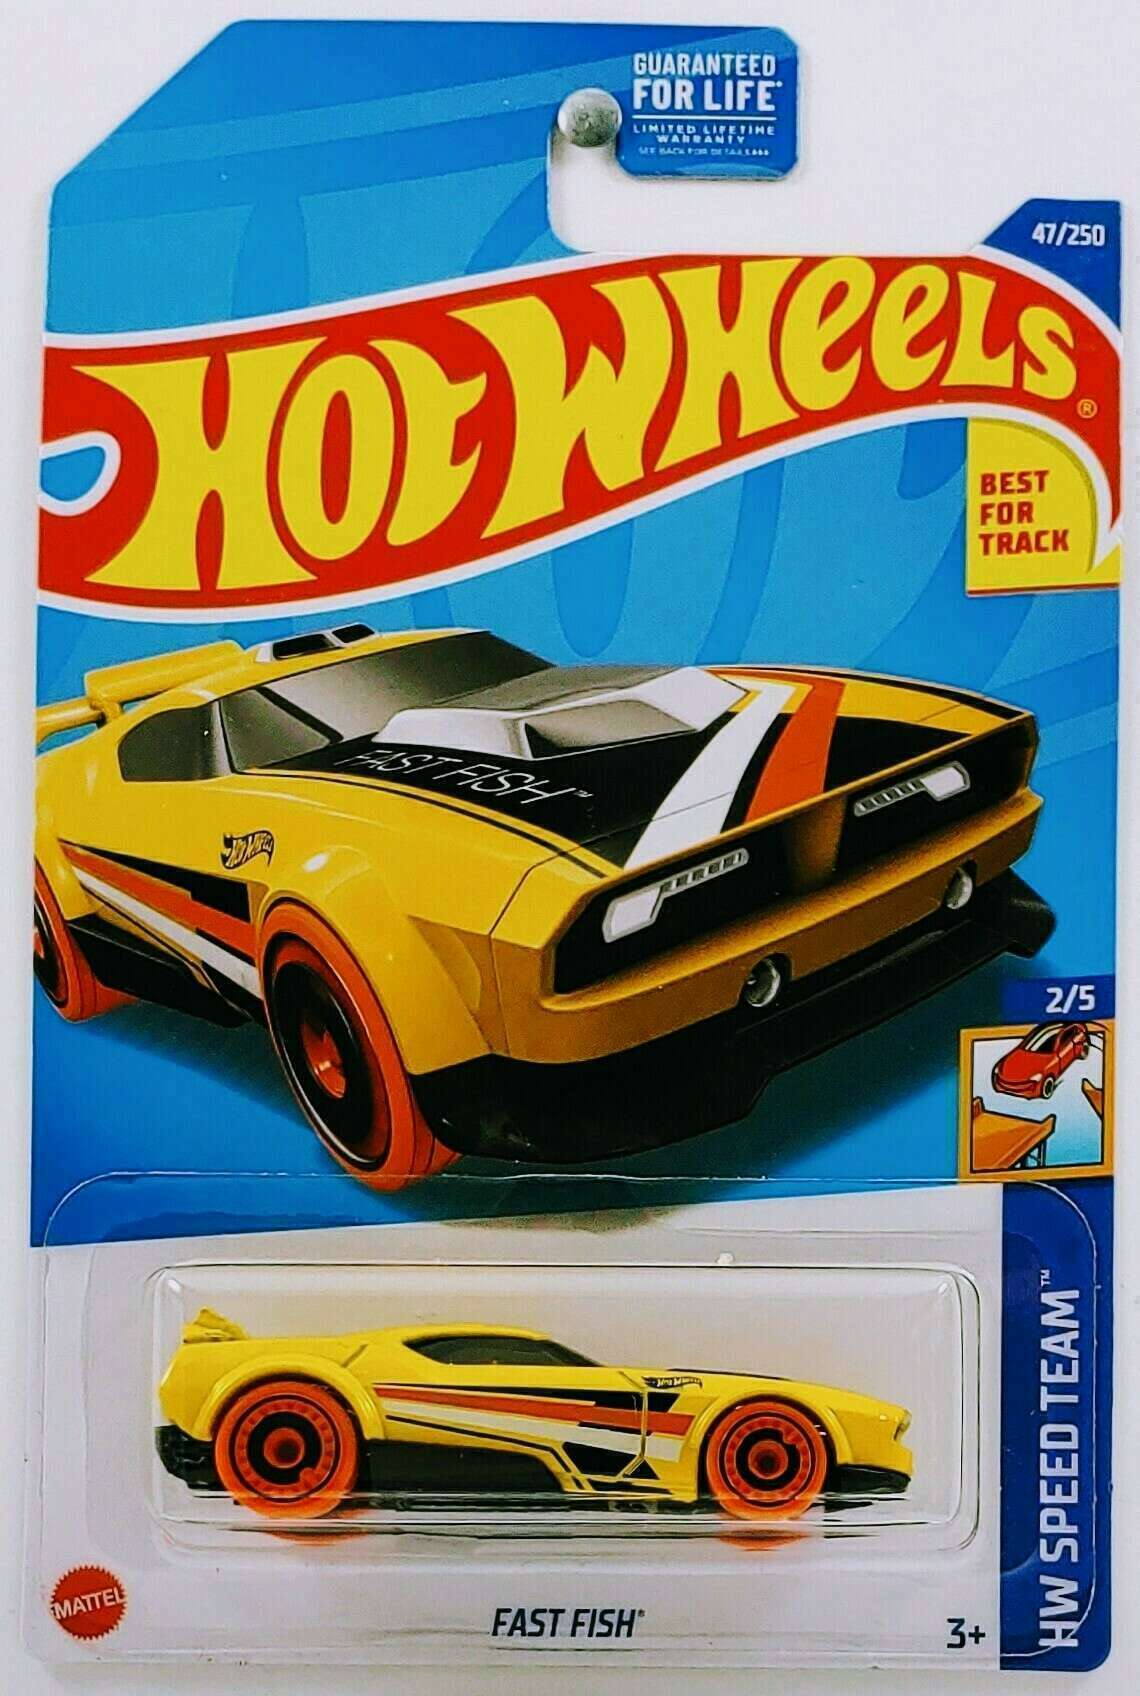 Hot Wheels 2022 - Collector # 047/250 - HW Speed Team 2/5 - Fast Fish